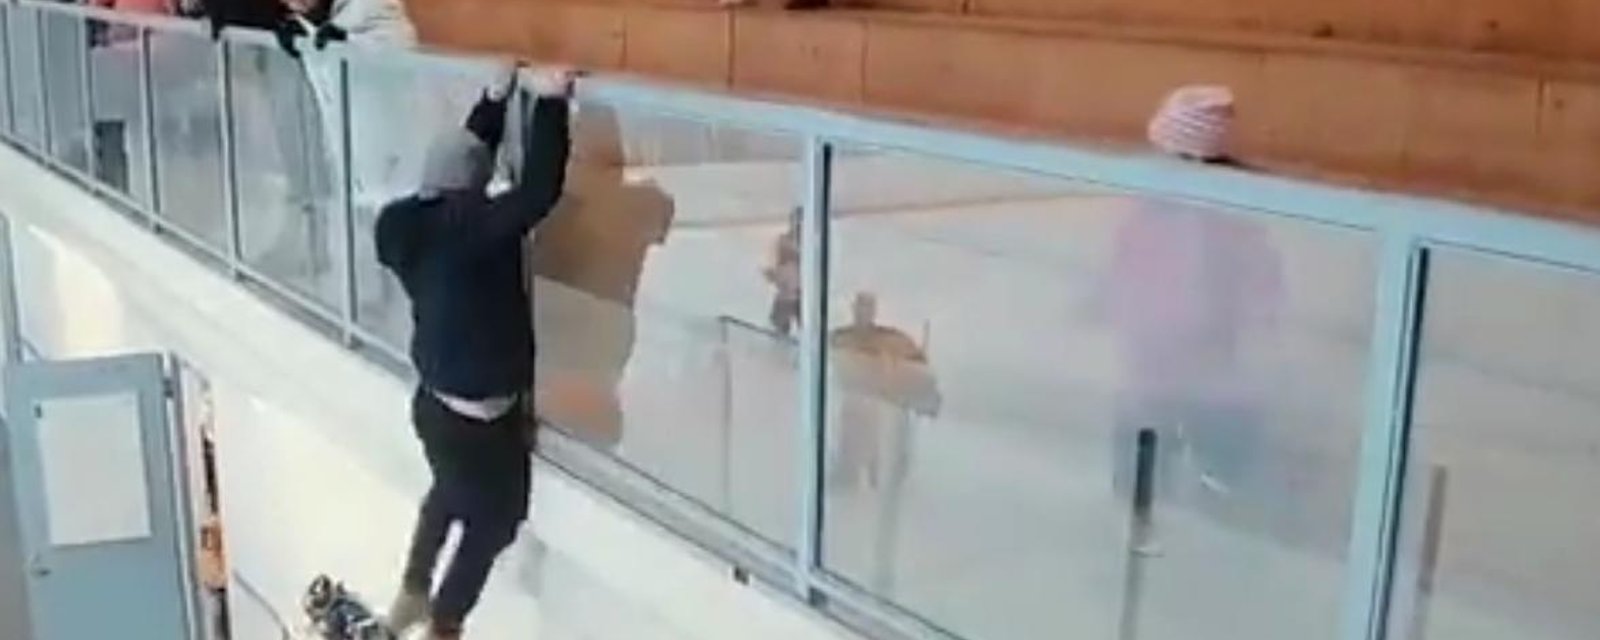 Crazed hockey fan jumps over the glass to attack a player.